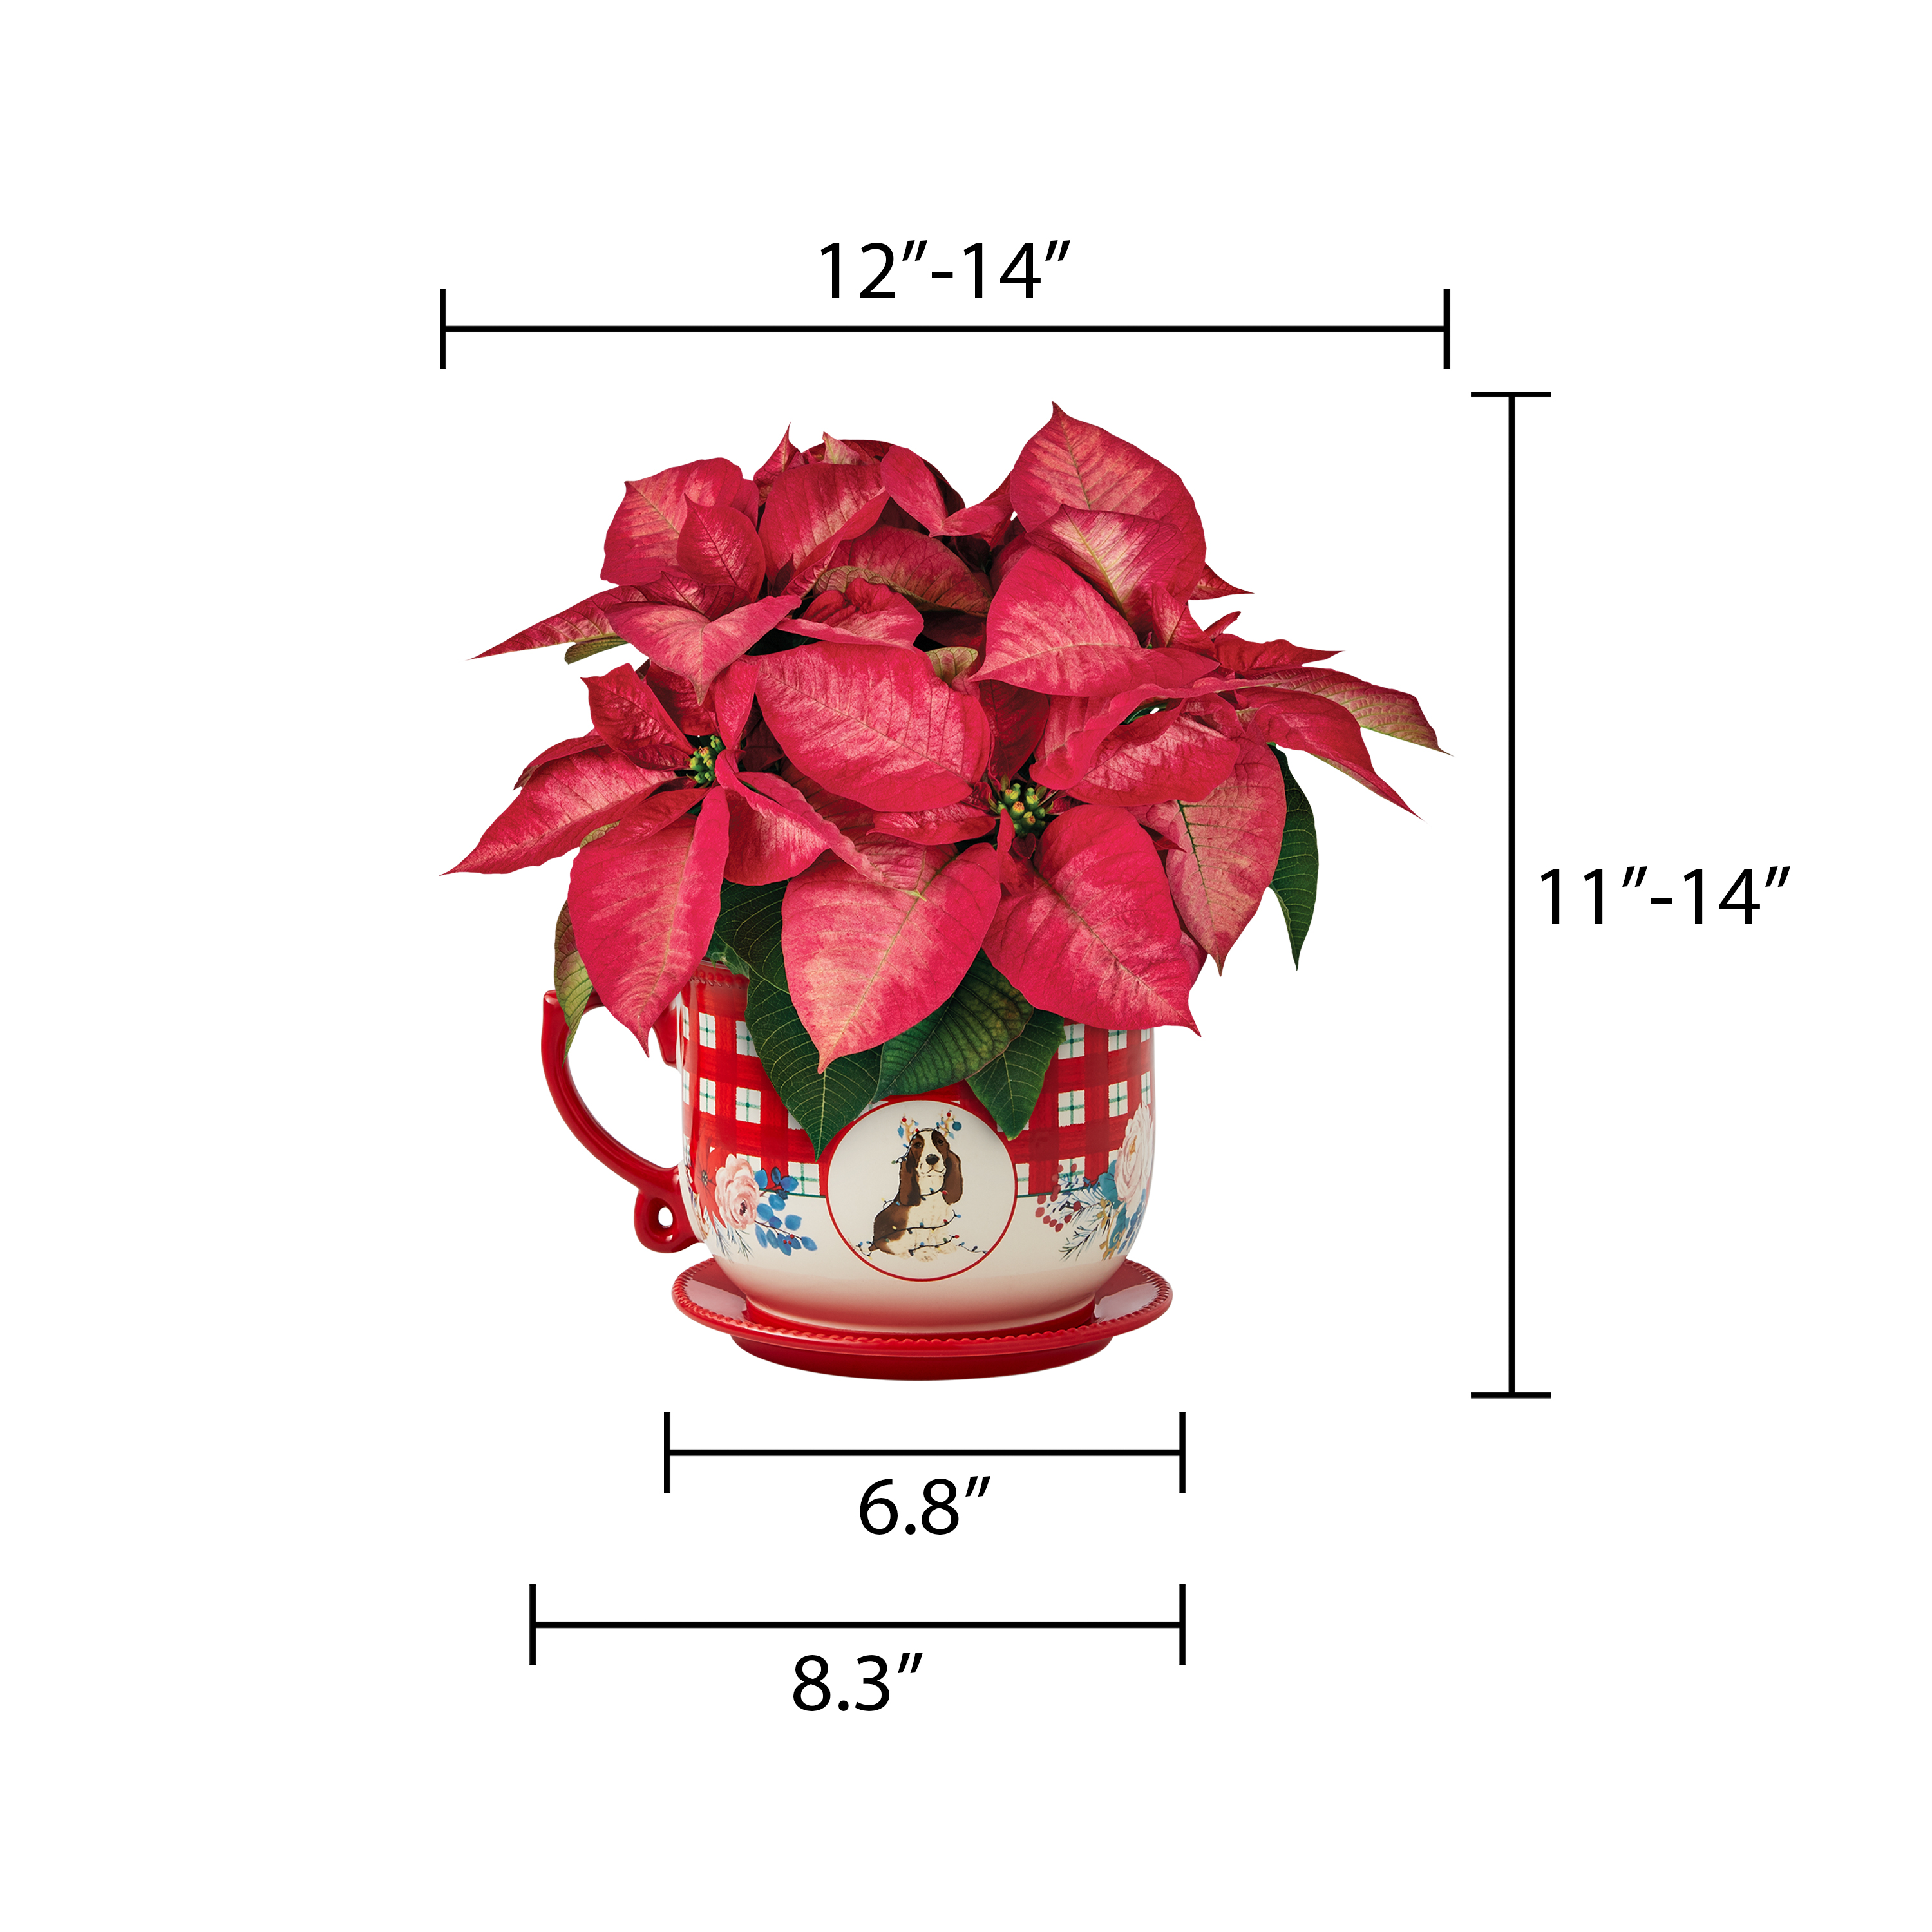 The Pioneer Woman Dark Pink Poinsettia Live Plant in 6" Mug Planter - image 6 of 9